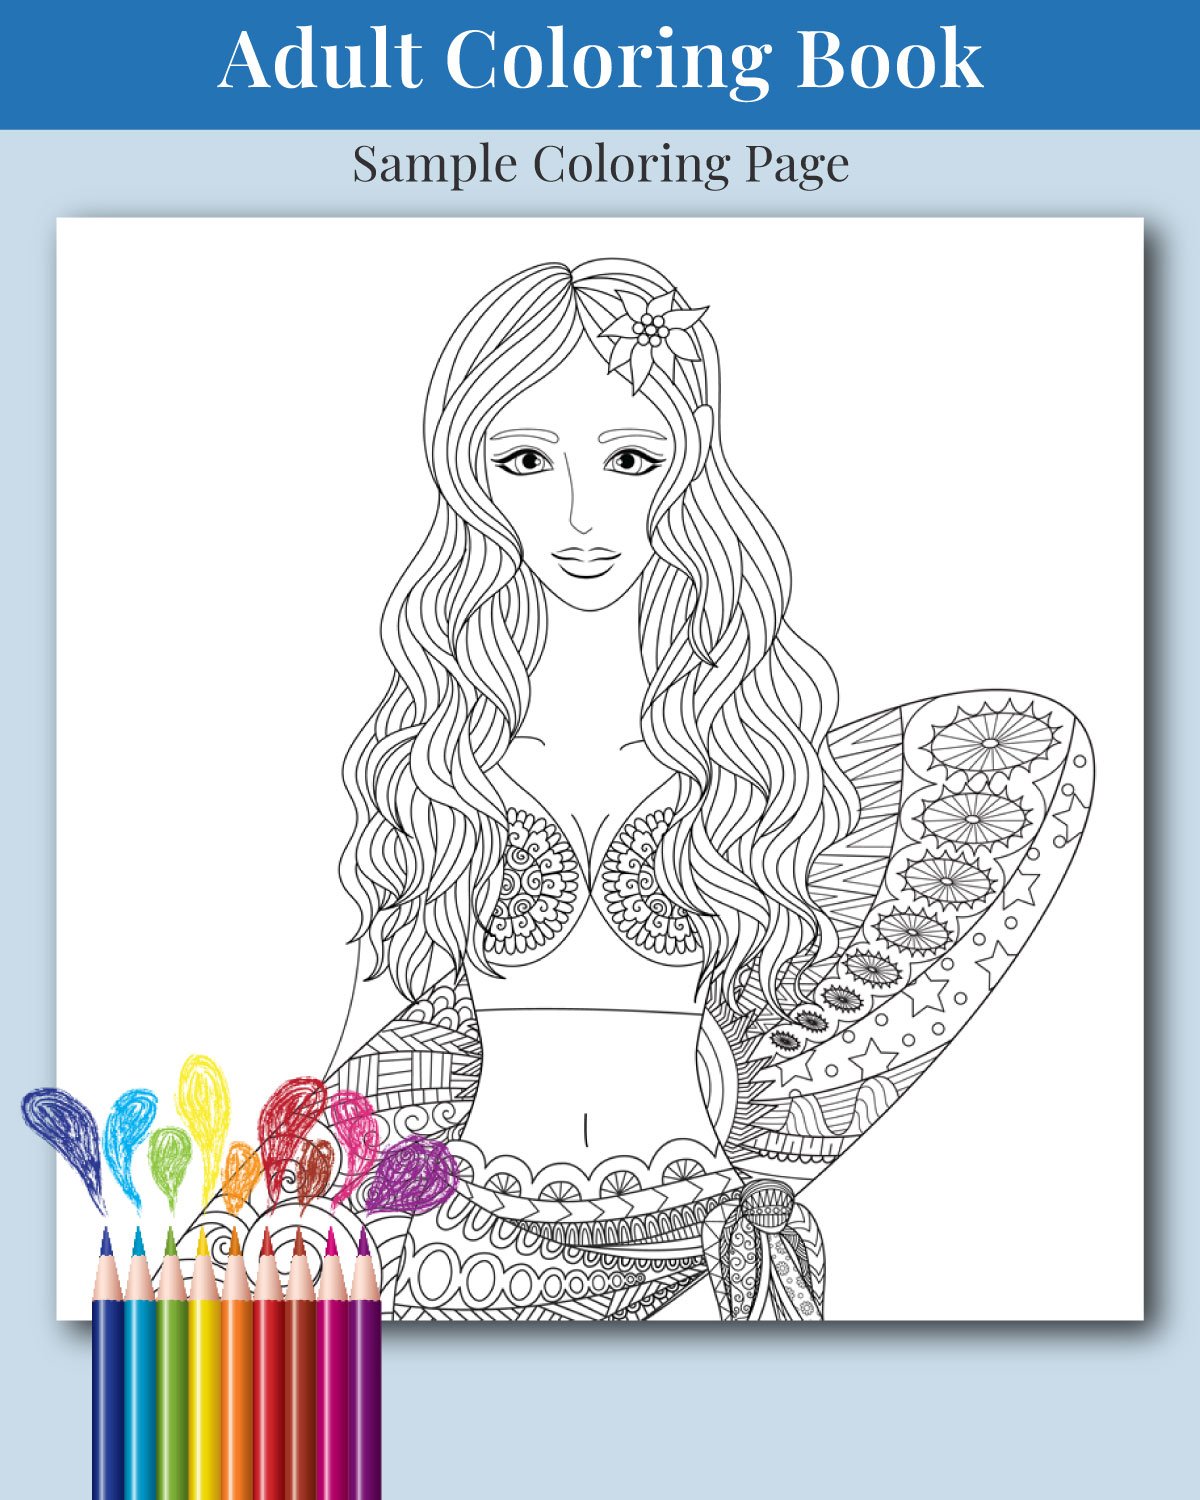 Surfs-Up-Dude-Adult-Coloring-Book-Sample-03